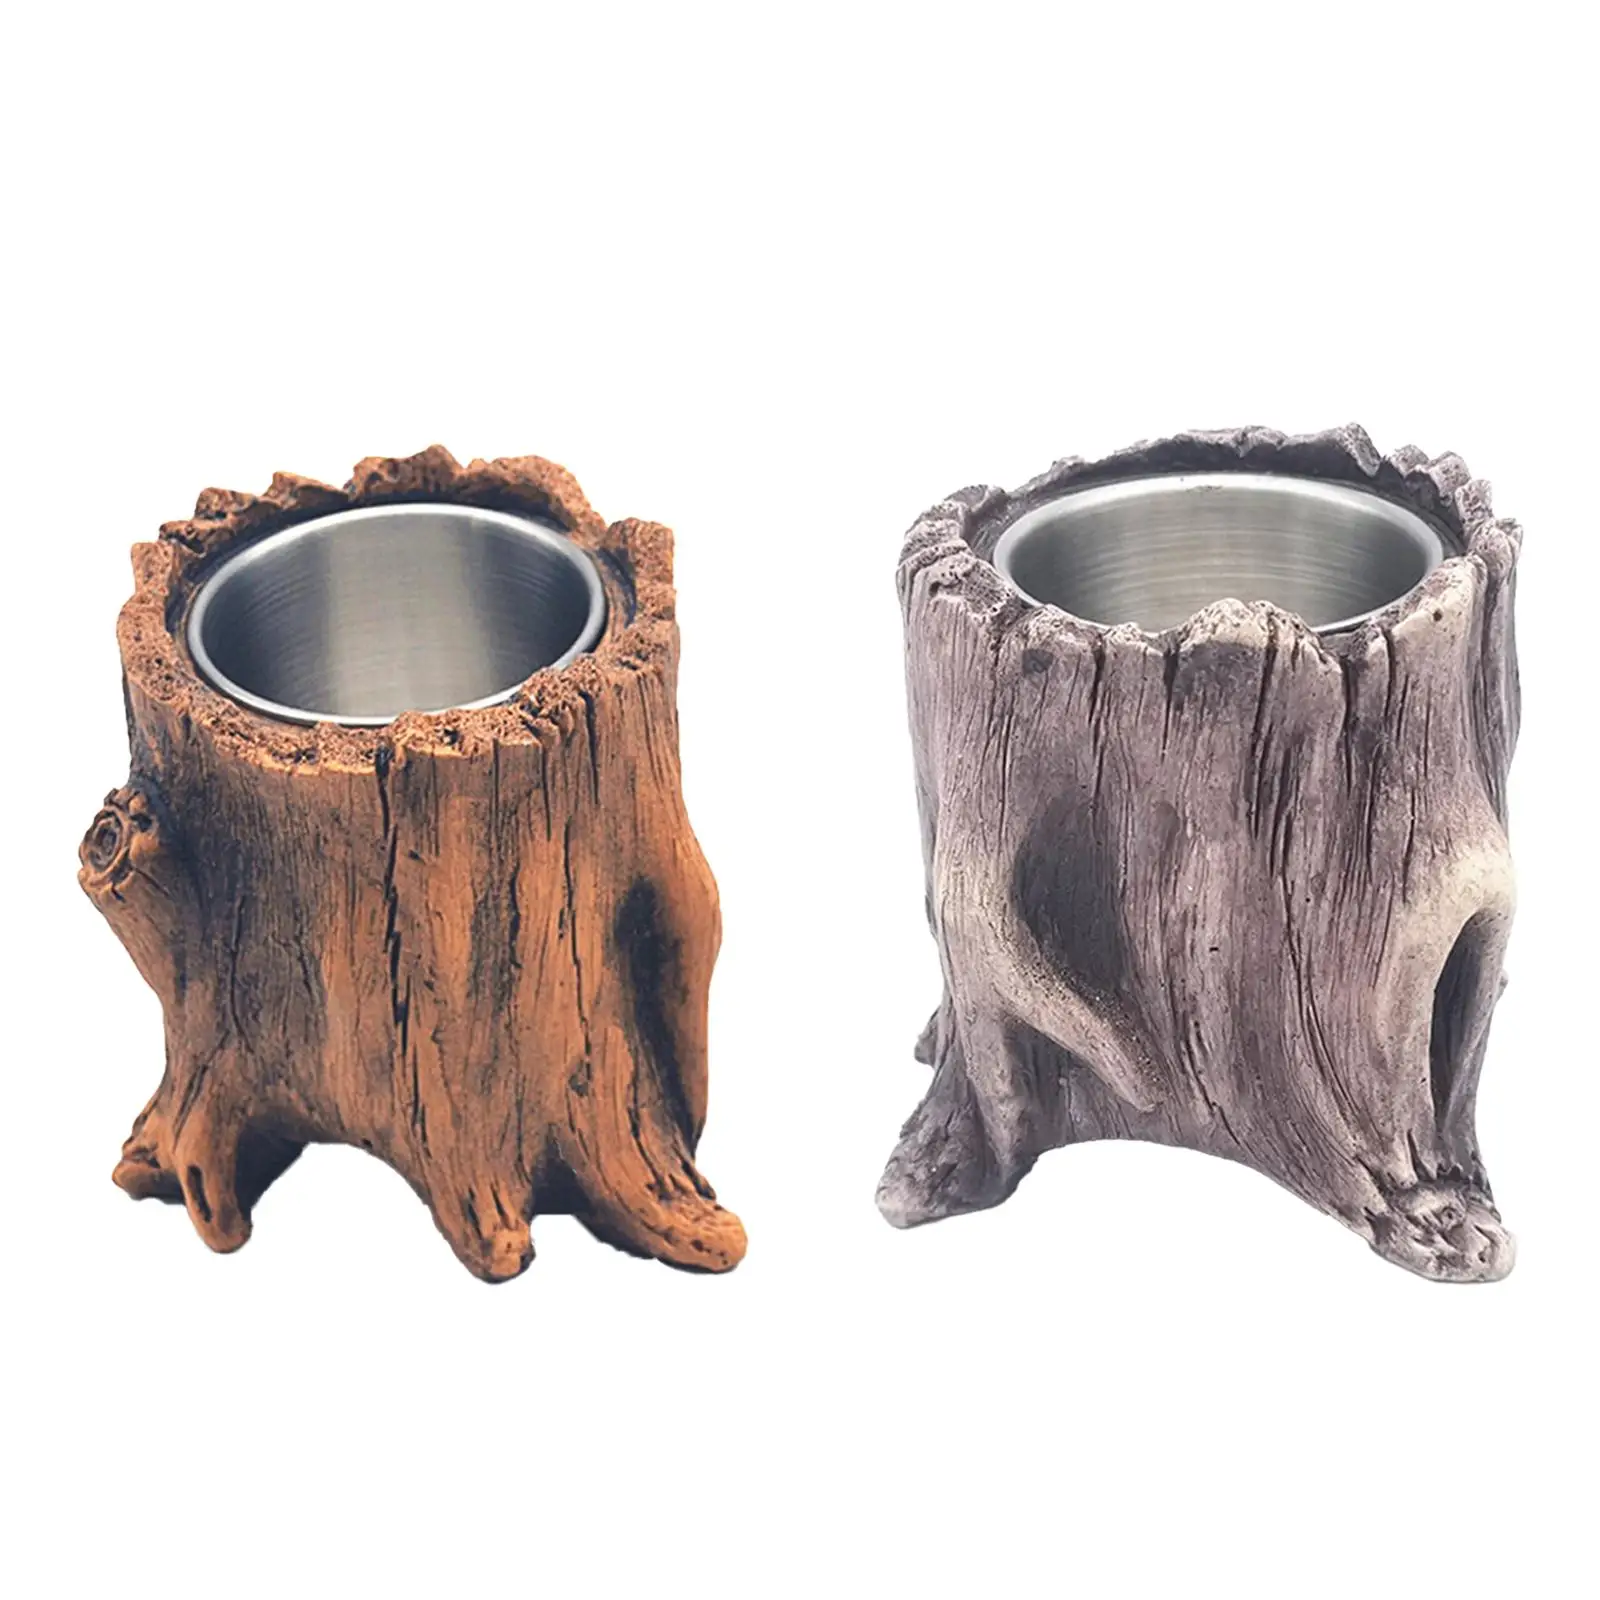 Indoor Fire Pit Tree Stump Conch Shape Smokeless Winter Burner Alcohol Fireplace for Gardens Bathroom Kitchen Camping Ornament